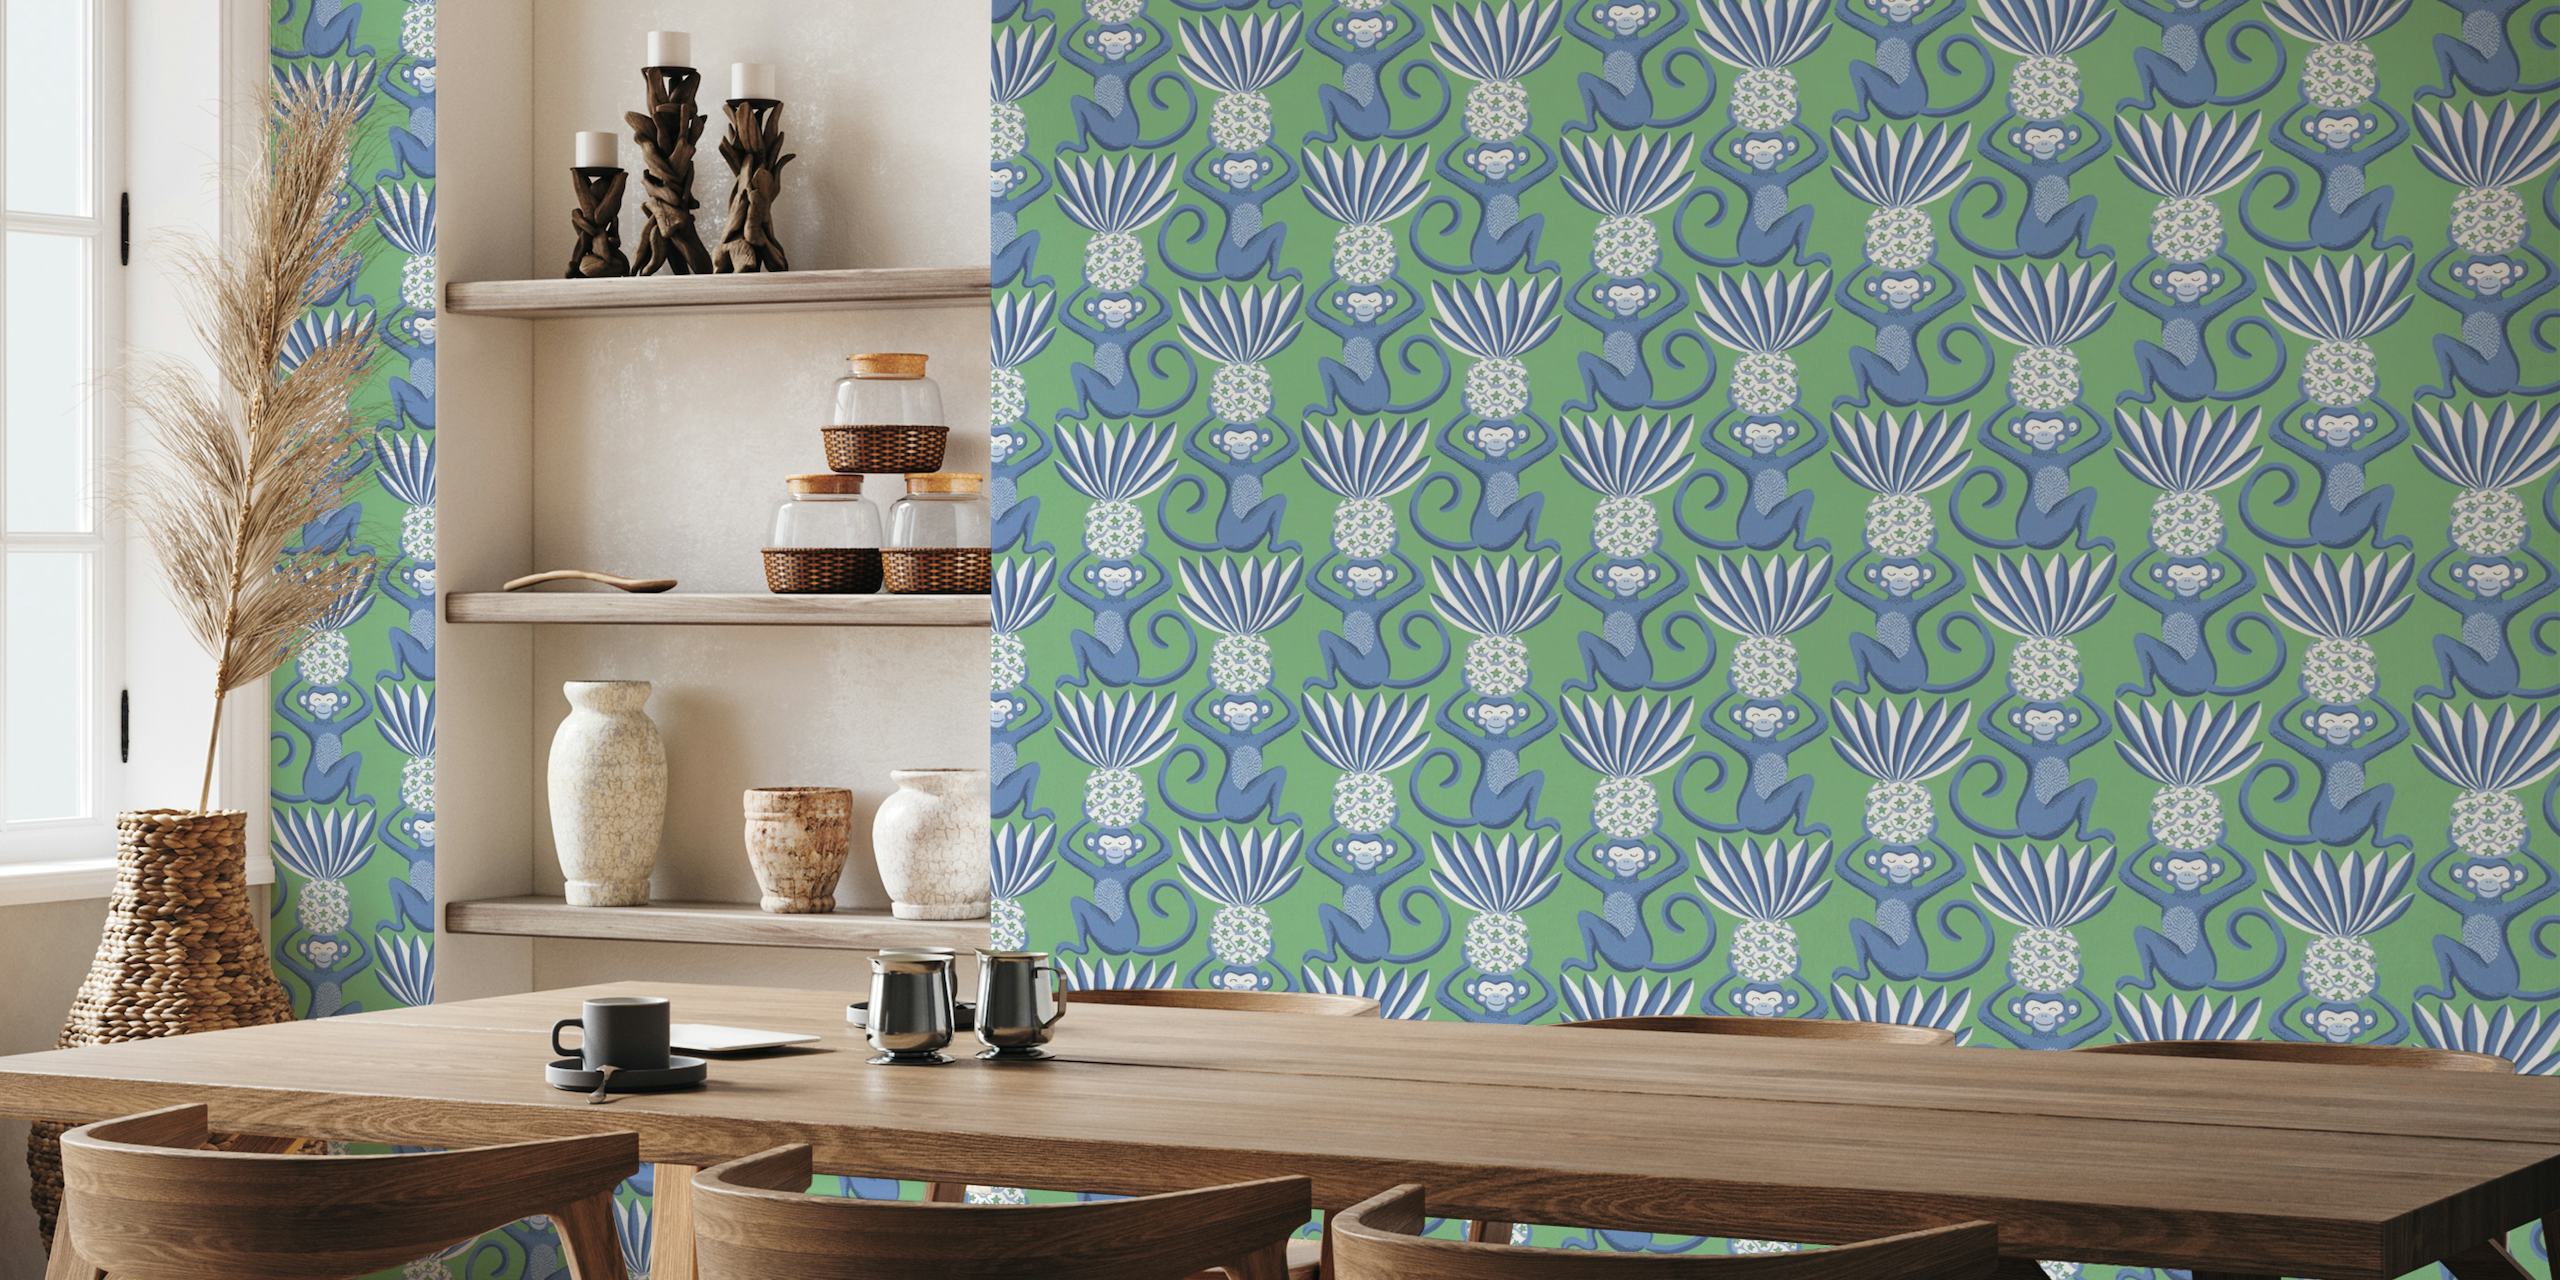 Monkeys and pineapples - blue and green wallpaper